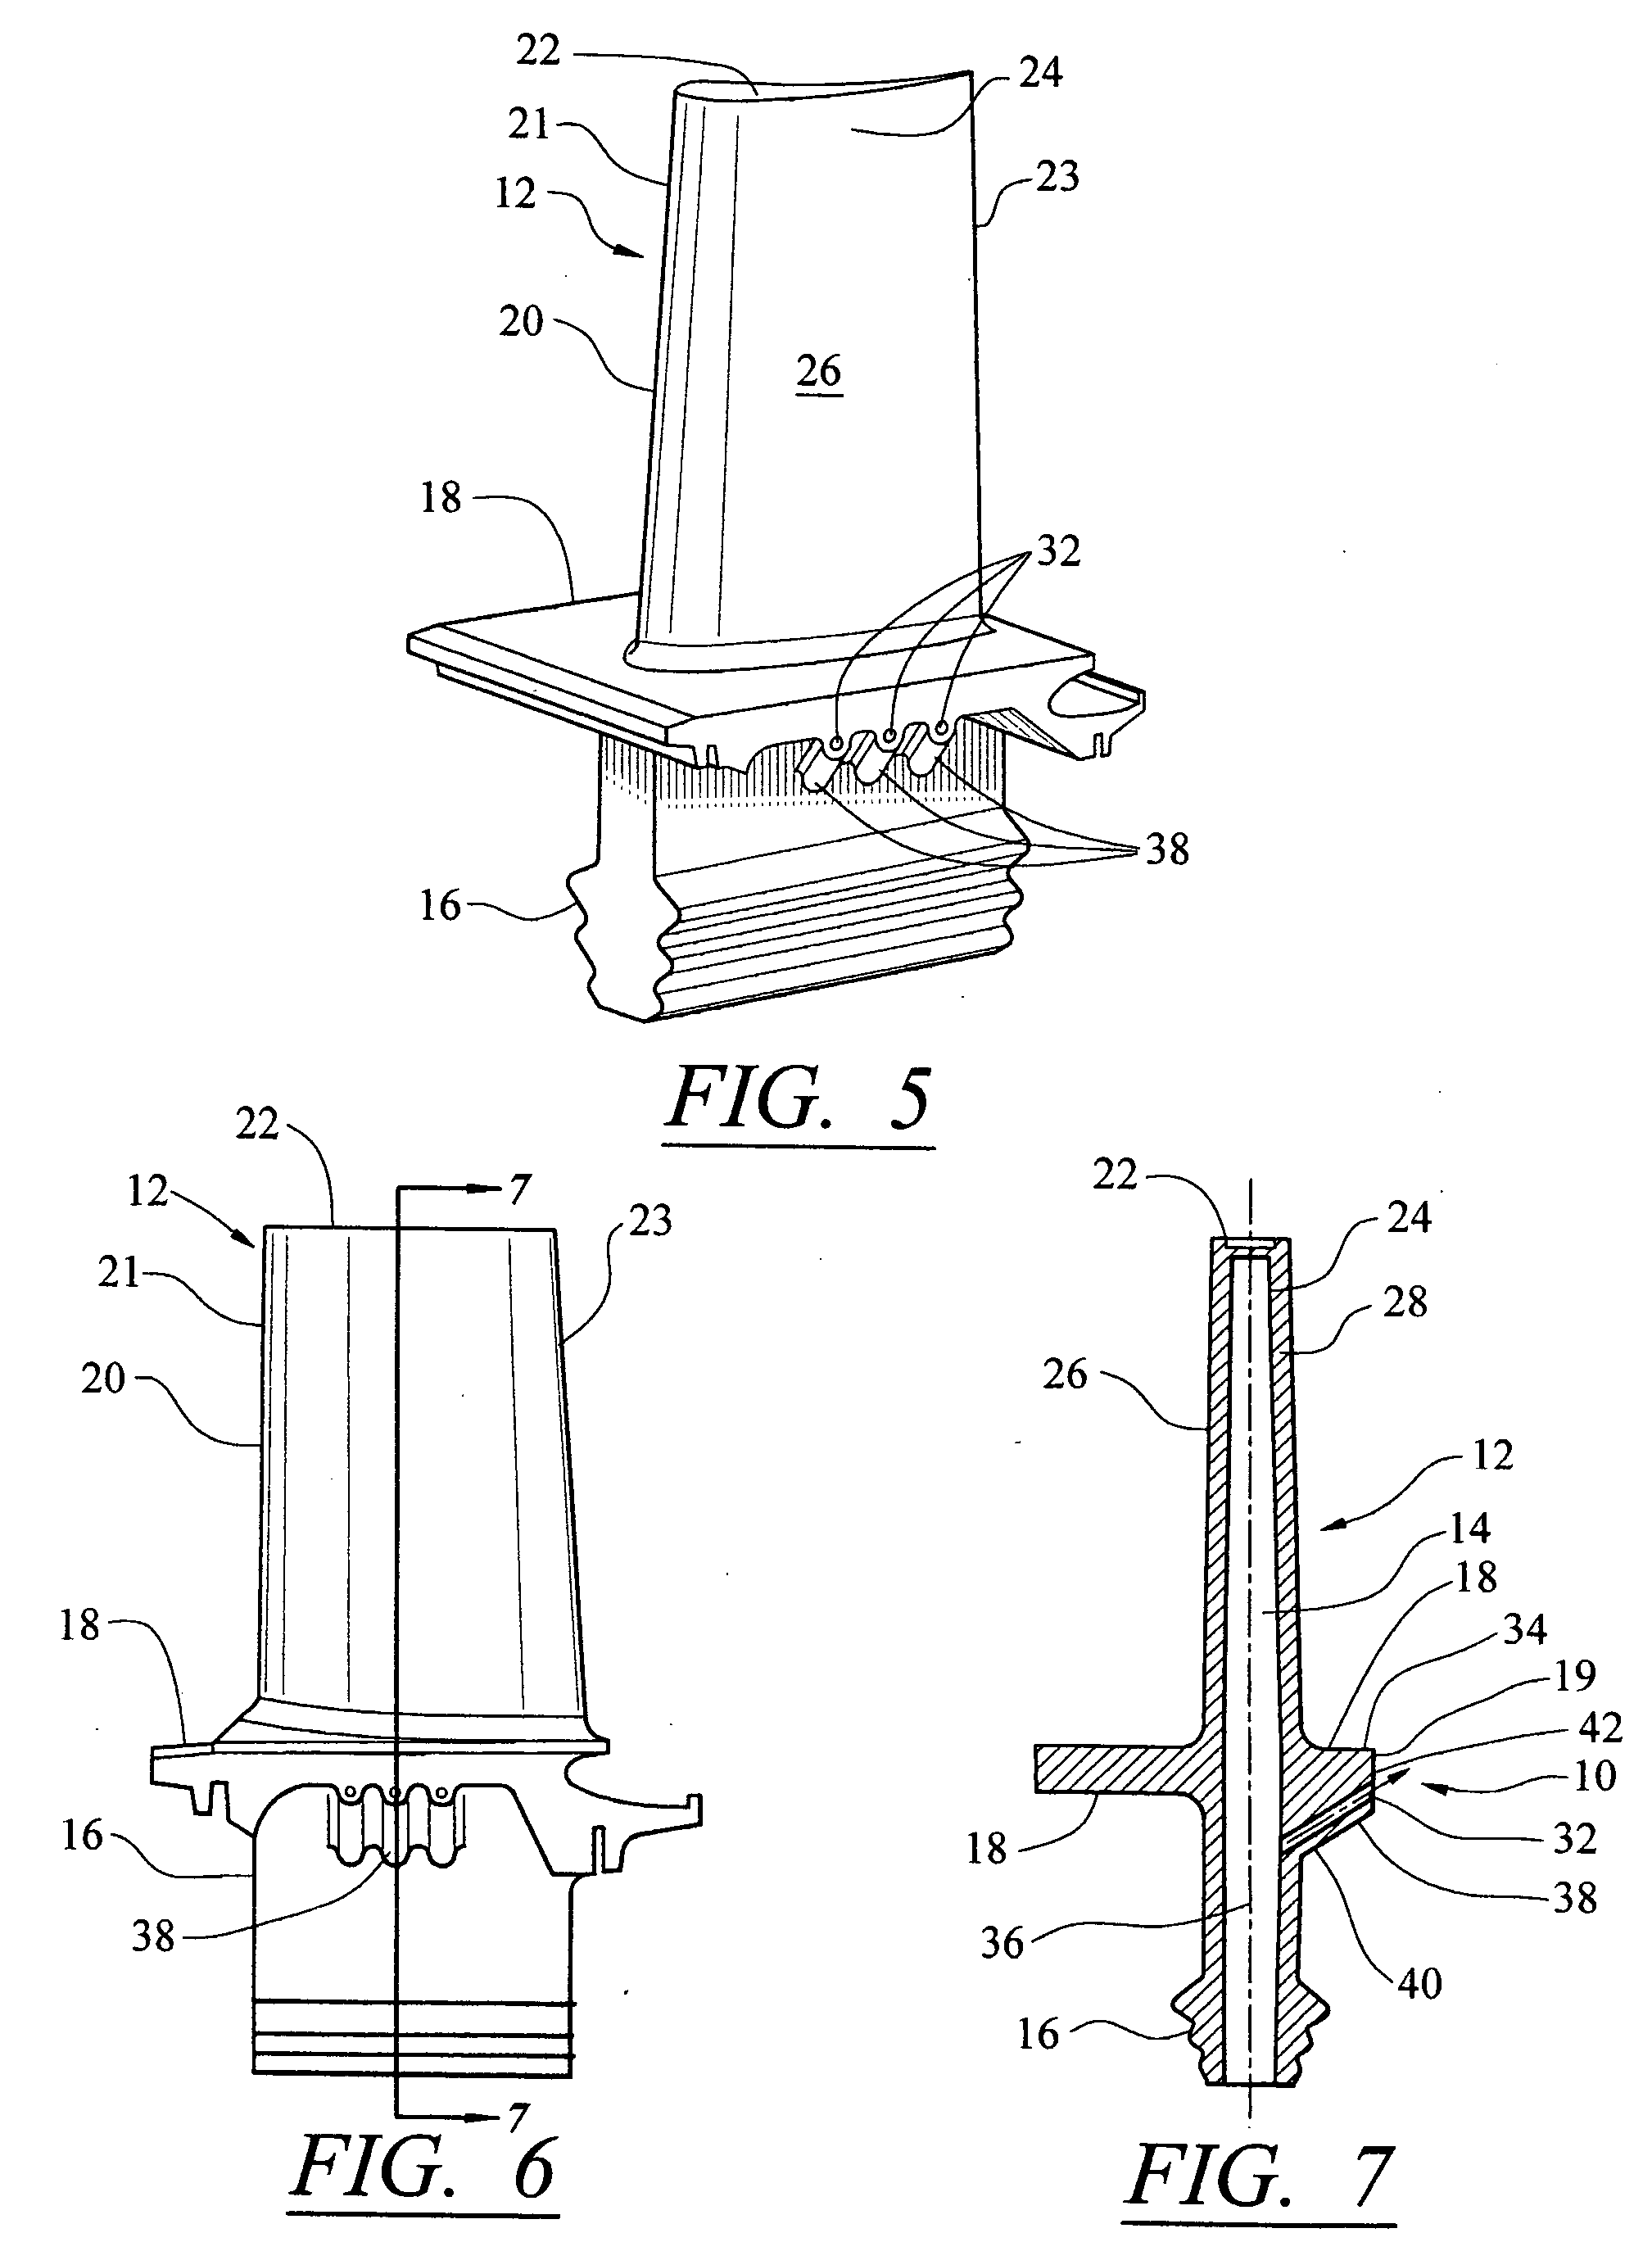 Cooling system for a platform of a turbine blade